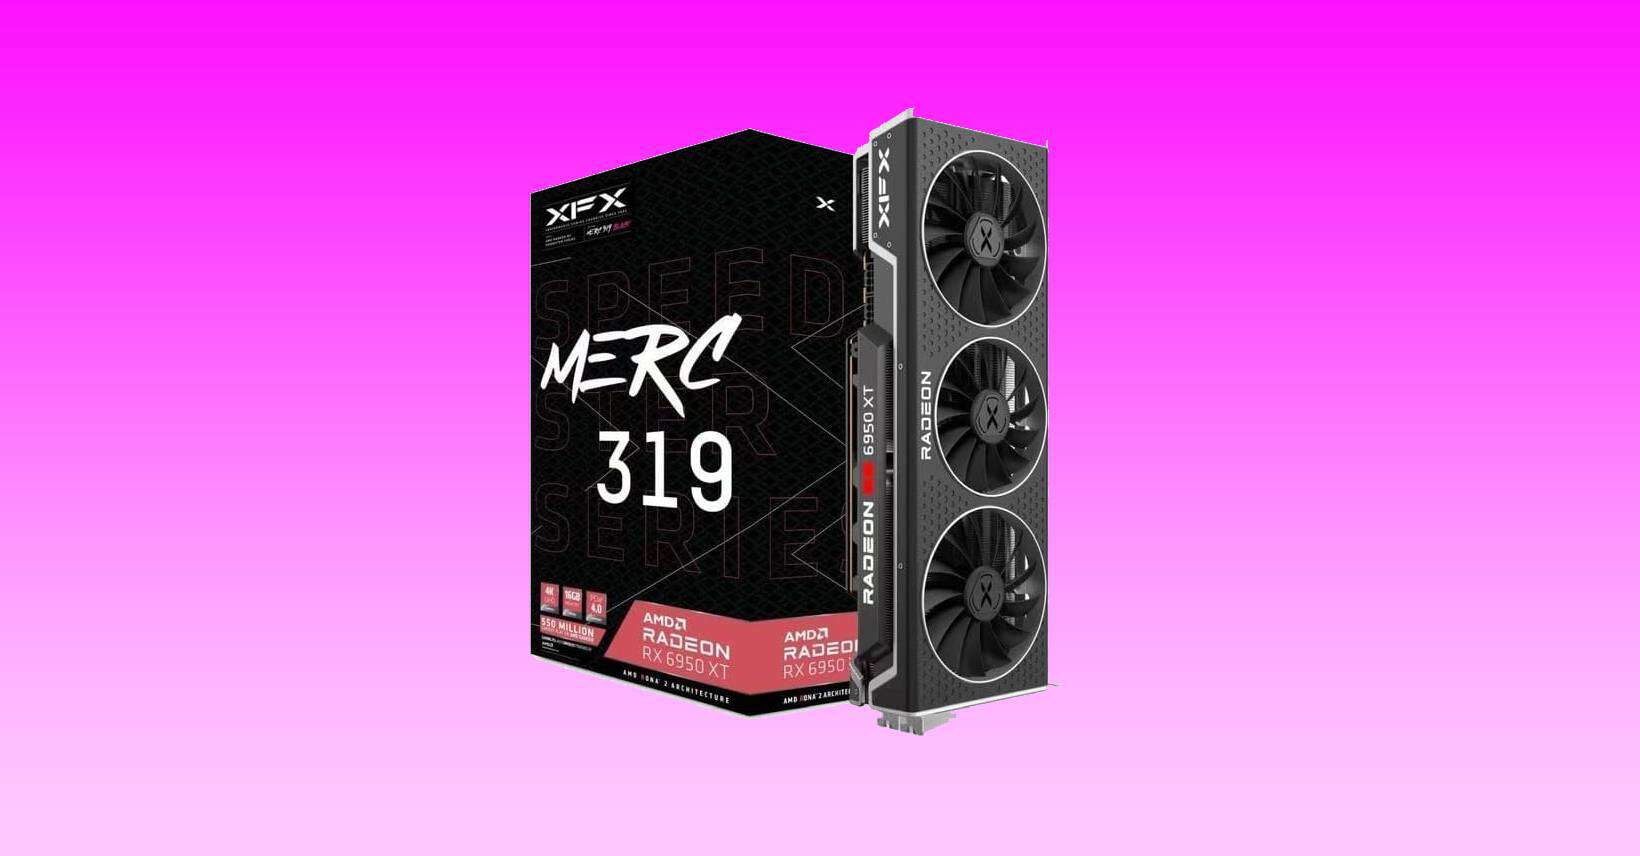 Save $320 on the XFX Speedster MERC319 RX 6950 XT GPU – Prime Day deal